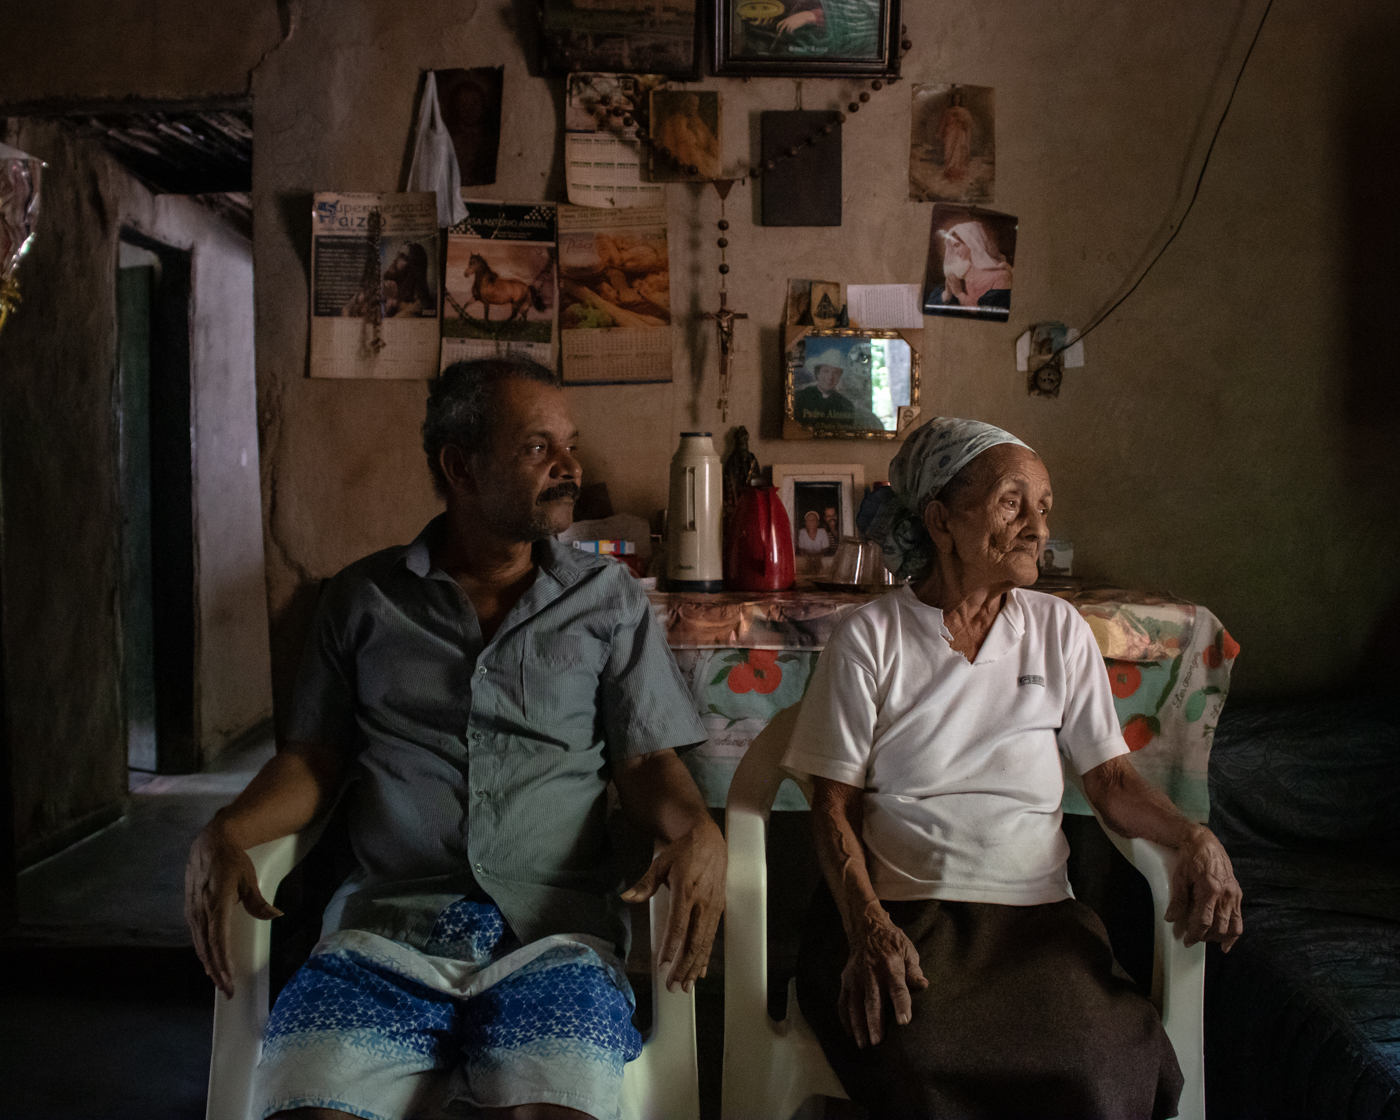 Andrezinho (left) sits next to his mother, Maria Teixeira, from whom he has learned the trade of benzer.